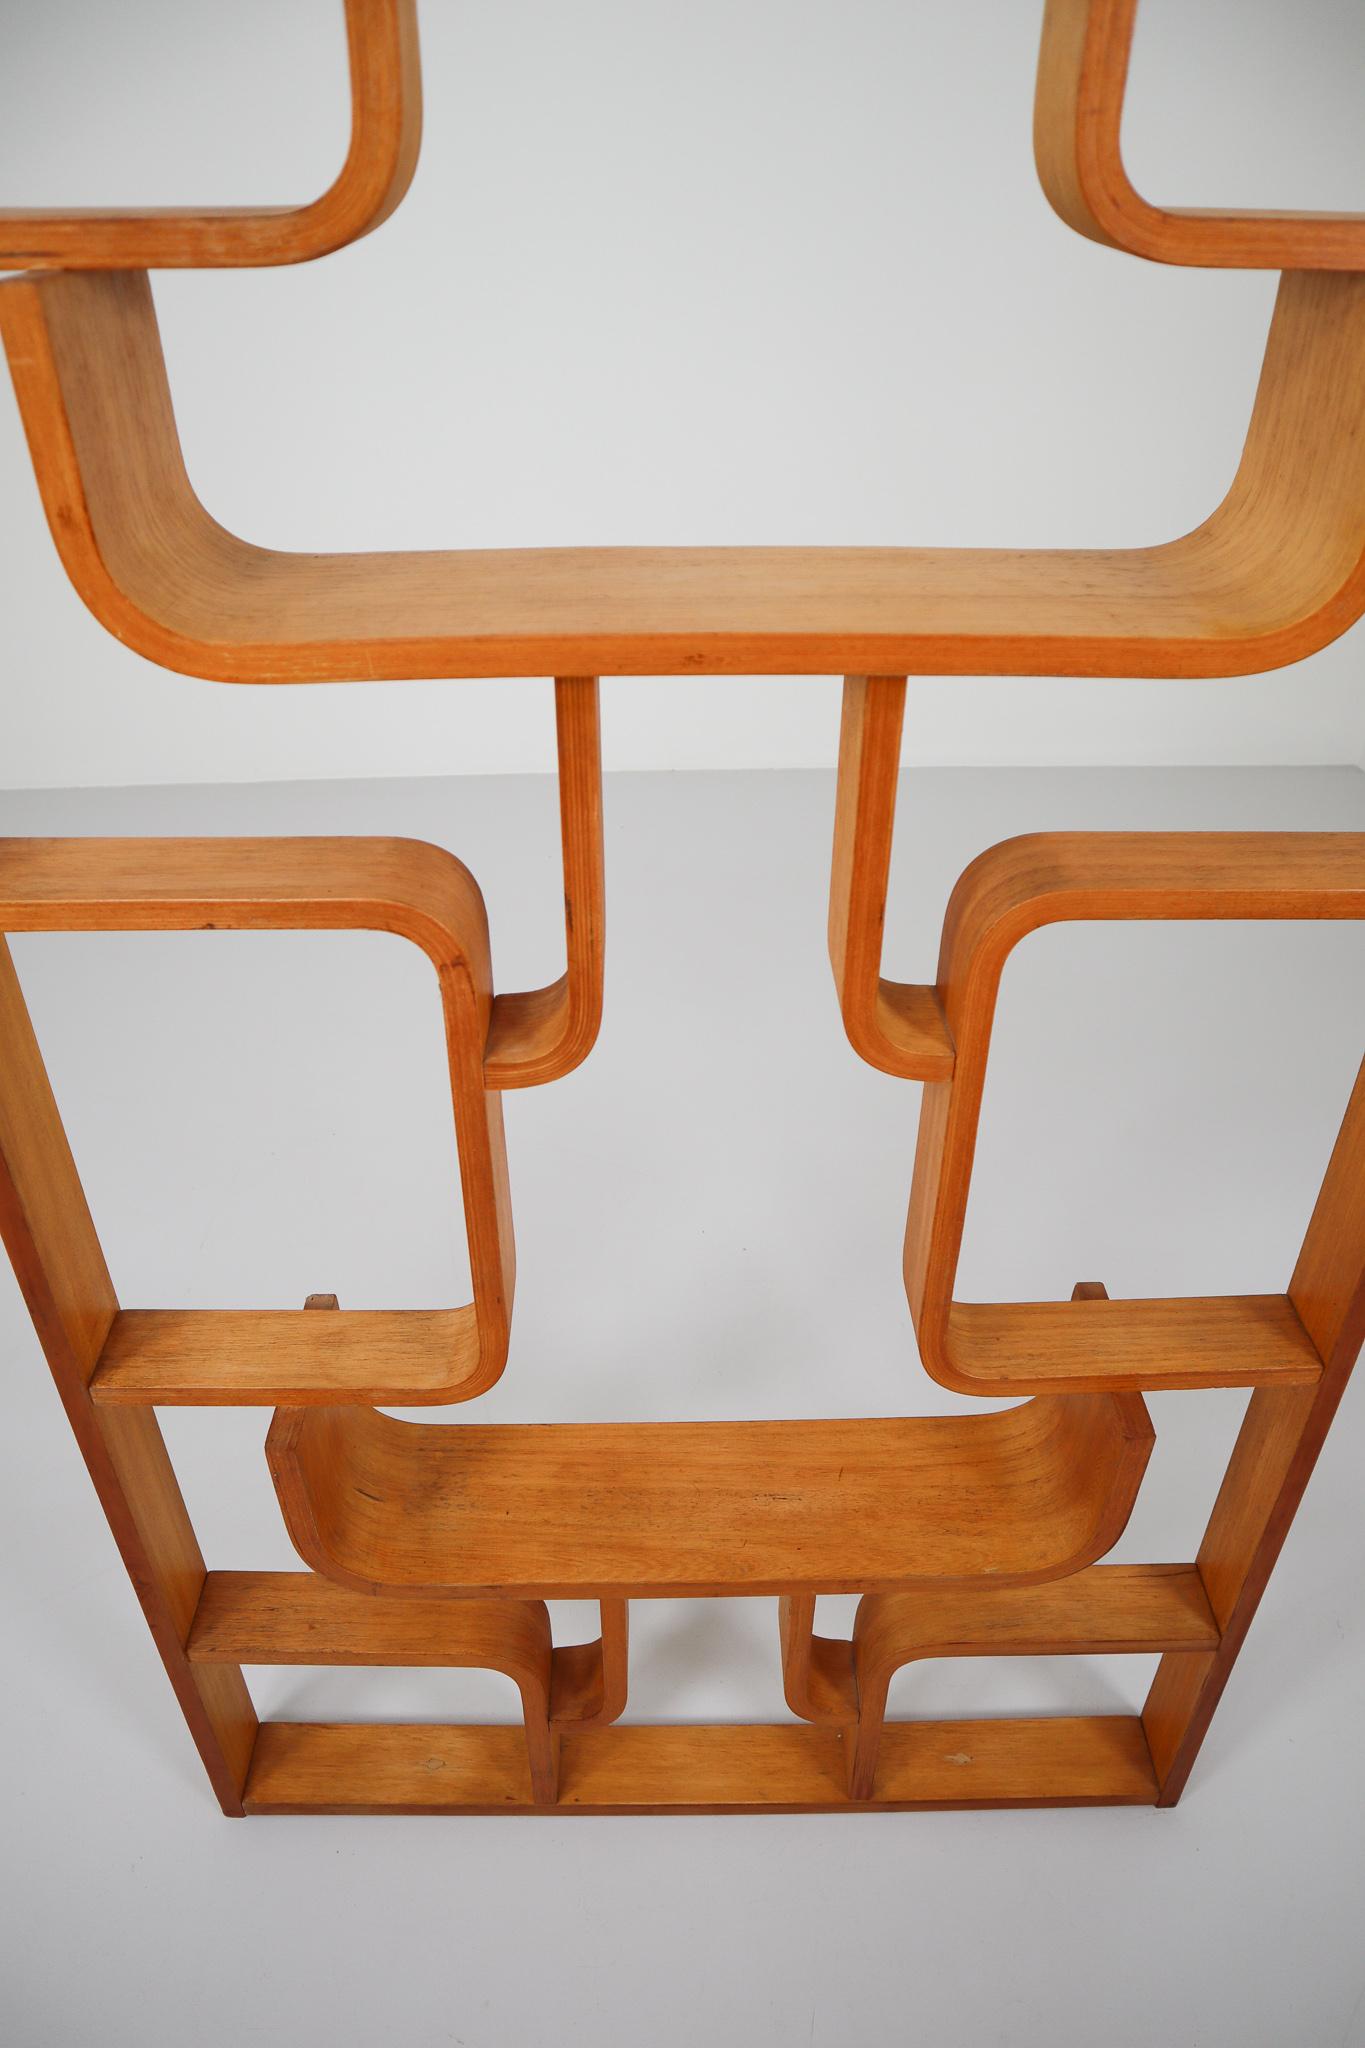 20th Century Midcentury Room Divider in Blond Bentwood, circa 1960s